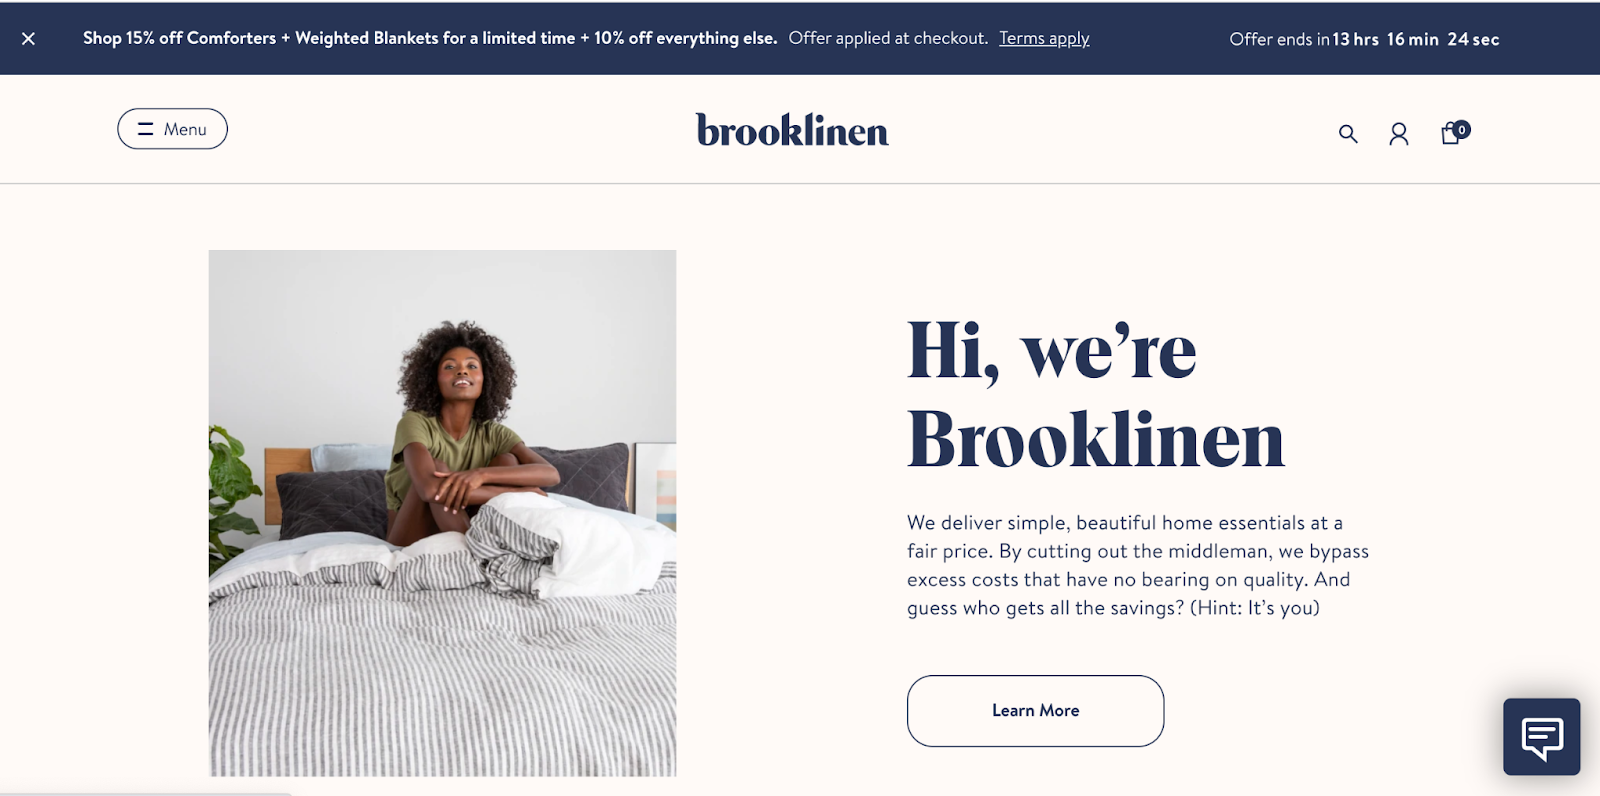 Brooklinen's about page